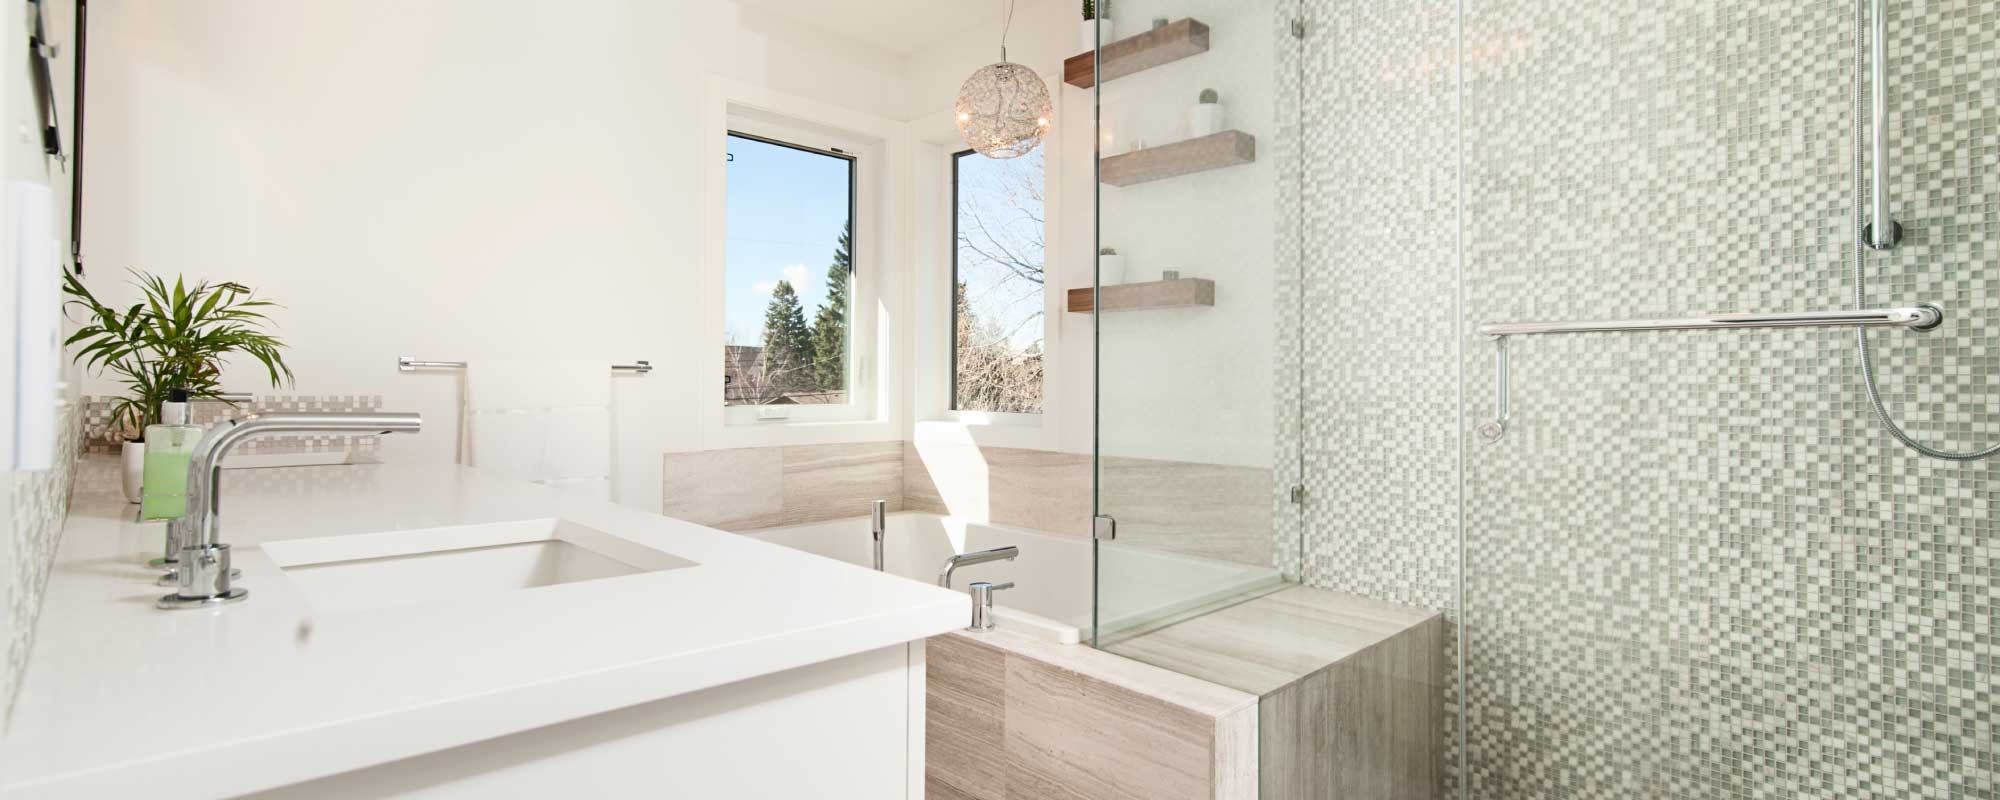 Staging your bathroom to sell your home